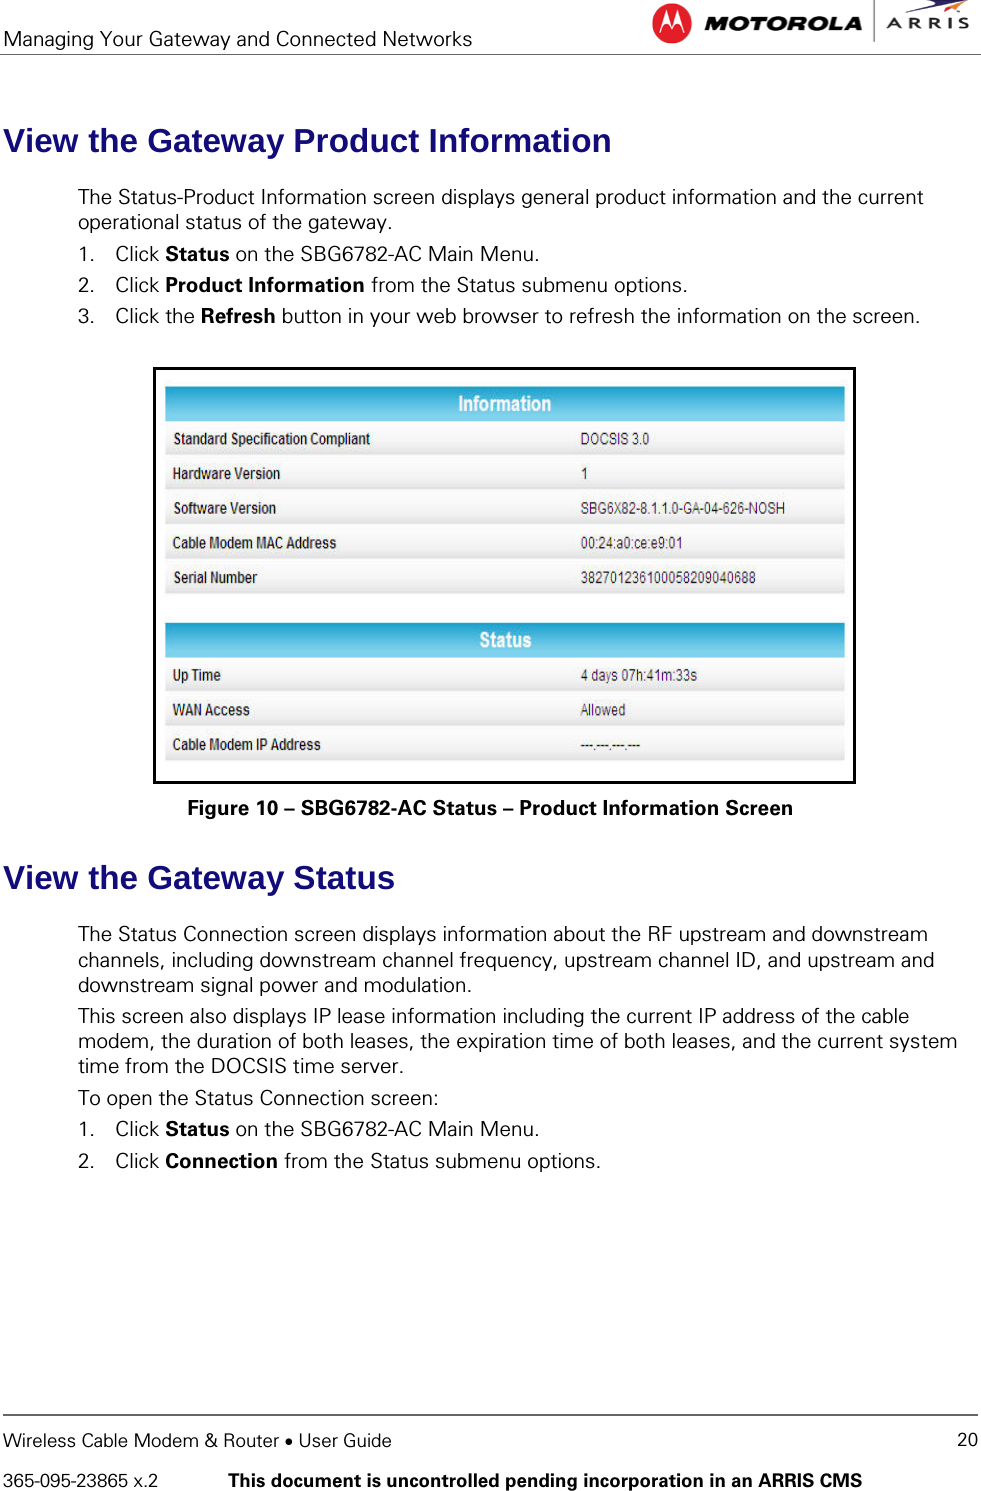 Managing Your Gateway and Connected Networks   Wireless Cable Modem &amp; Router • User Guide 20 365-095-23865 x.2   This document is uncontrolled pending incorporation in an ARRIS CMS  View the Gateway Product Information The Status-Product Information screen displays general product information and the current operational status of the gateway. 1. Click Status on the SBG6782-AC Main Menu. 2. Click Product Information from the Status submenu options. 3. Click the Refresh button in your web browser to refresh the information on the screen.  Figure 10 – SBG6782-AC Status – Product Information Screen View the Gateway Status The Status Connection screen displays information about the RF upstream and downstream channels, including downstream channel frequency, upstream channel ID, and upstream and downstream signal power and modulation. This screen also displays IP lease information including the current IP address of the cable modem, the duration of both leases, the expiration time of both leases, and the current system time from the DOCSIS time server. To open the Status Connection screen: 1. Click Status on the SBG6782-AC Main Menu. 2. Click Connection from the Status submenu options. 